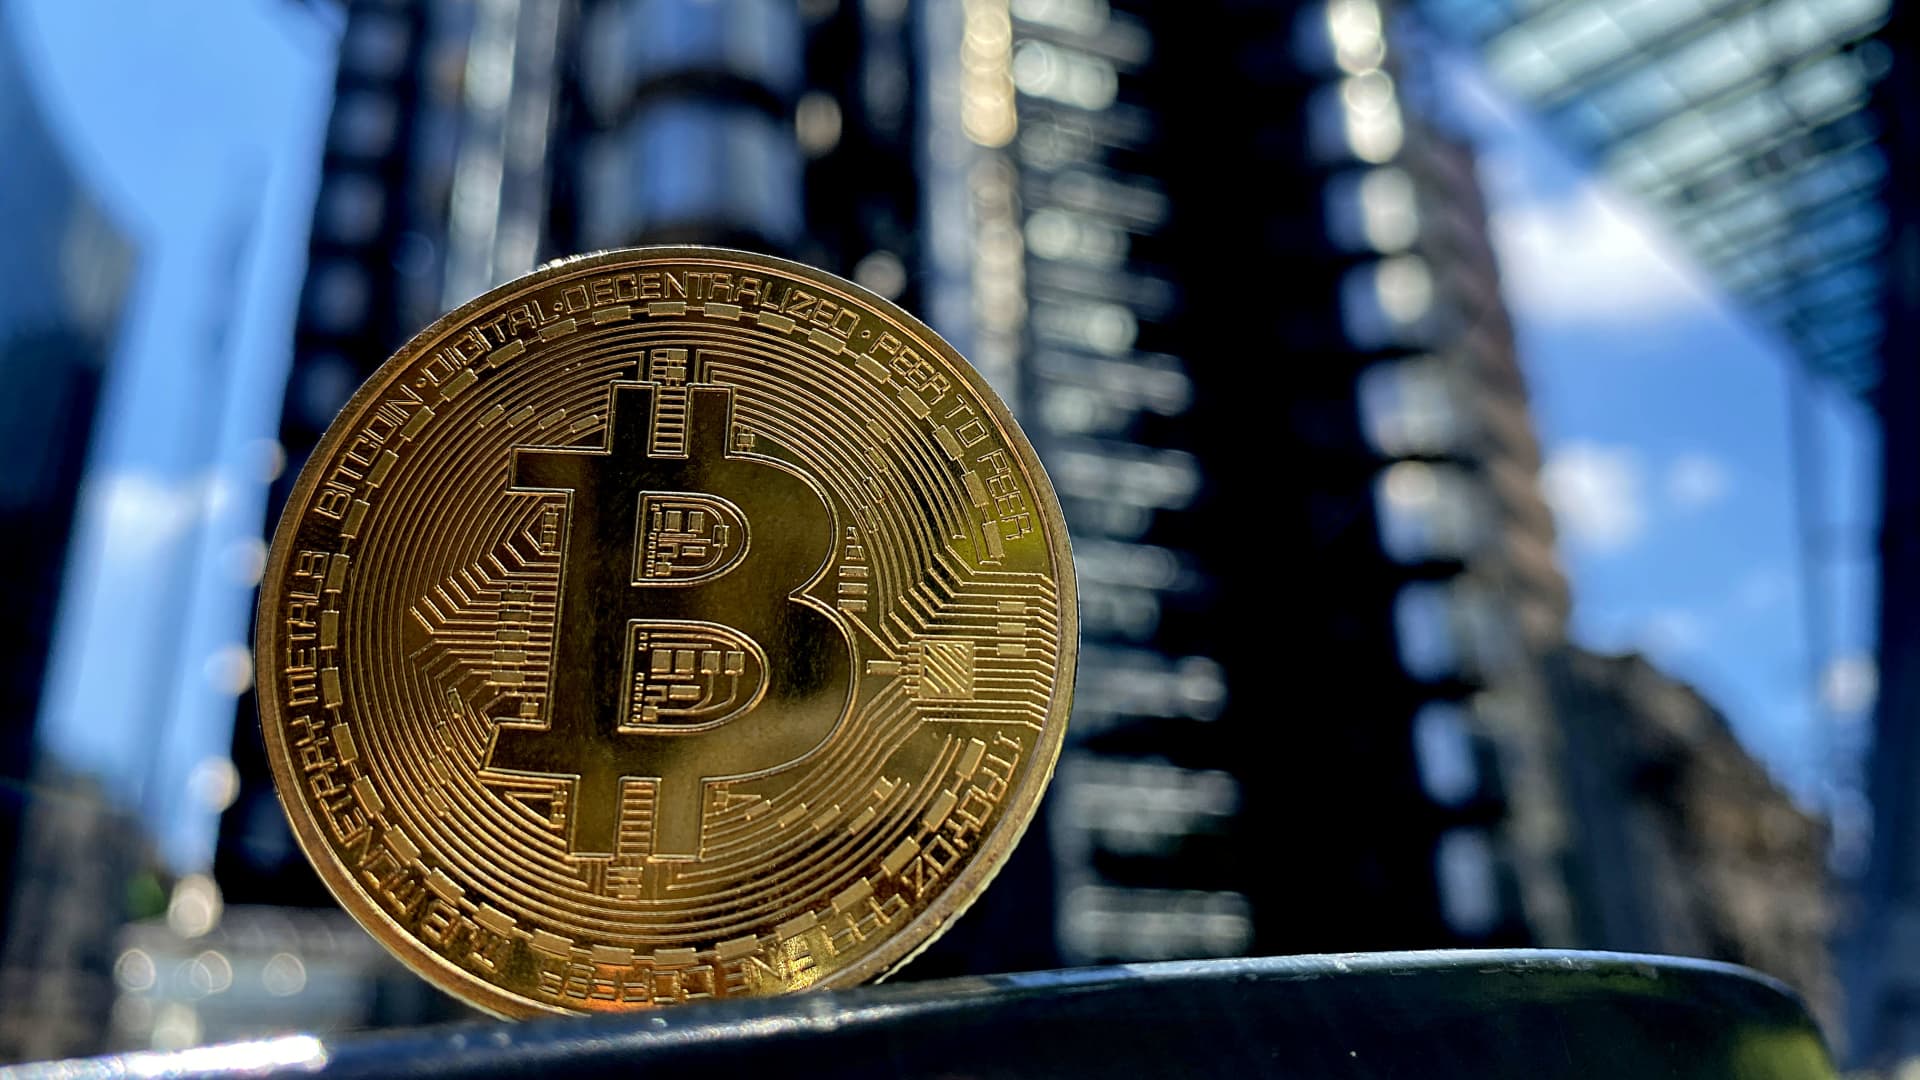 Bitcoin has climbed more than 10% this week, outperforming stocks